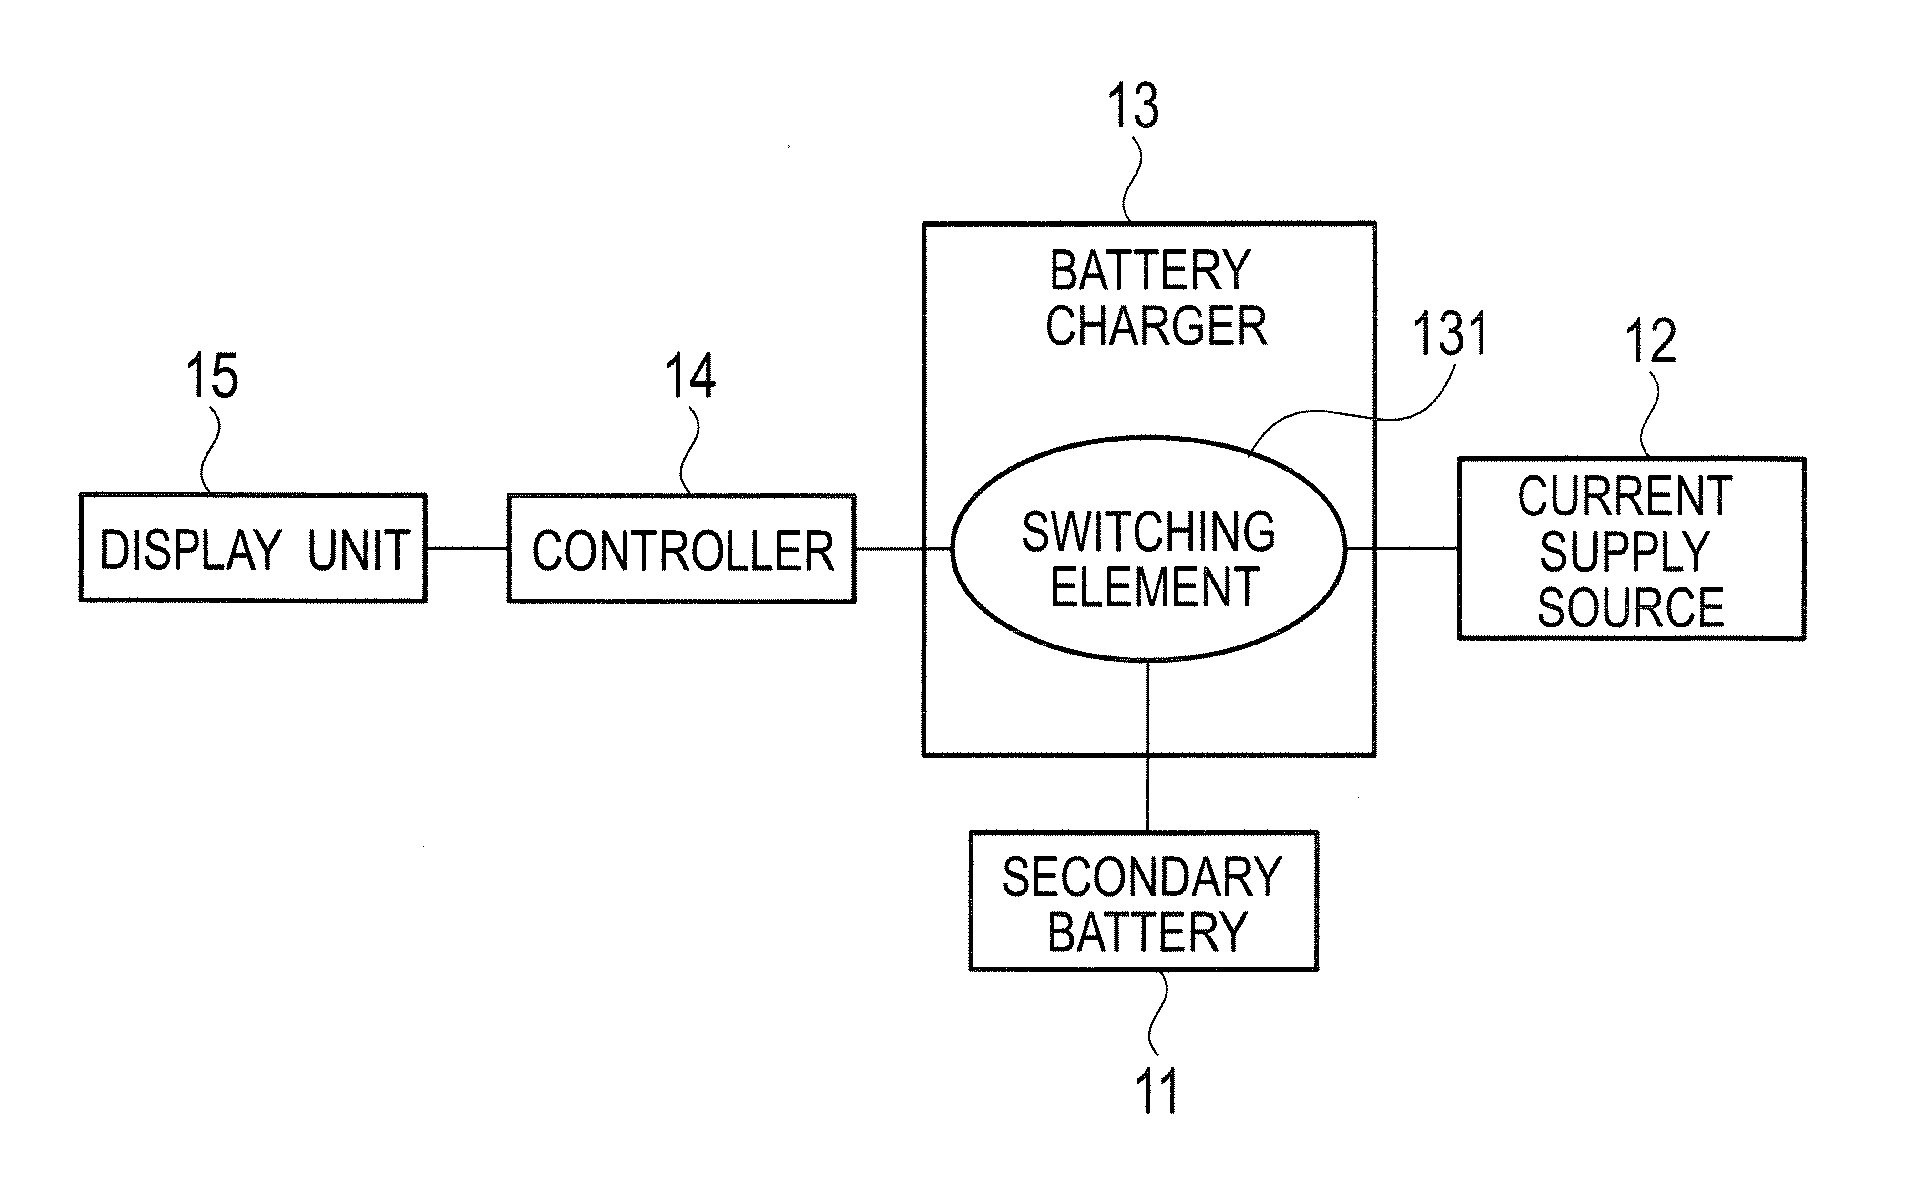 Rechargeable electric device